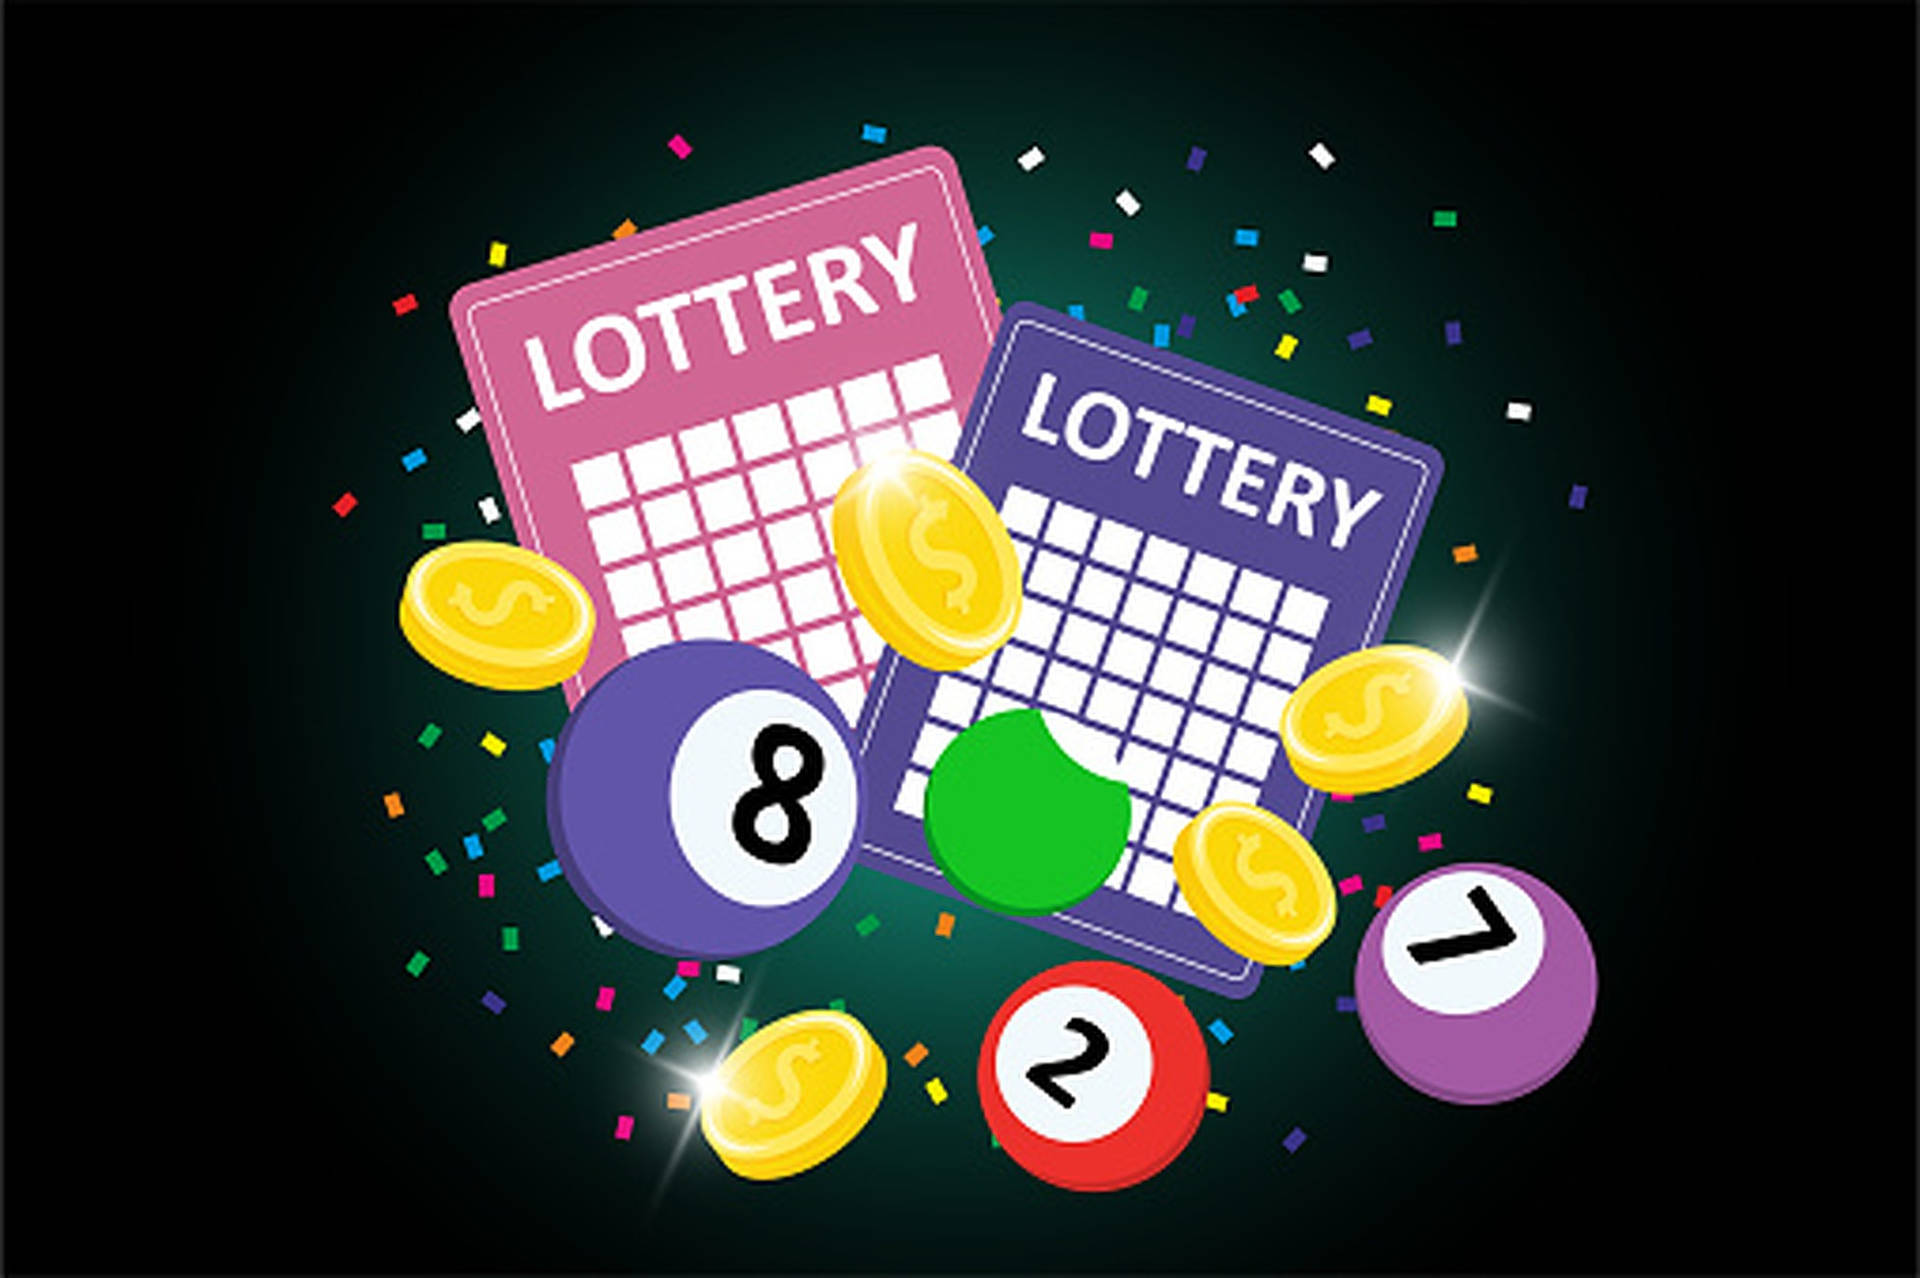 Lottery Tickets And Gold Coins Background